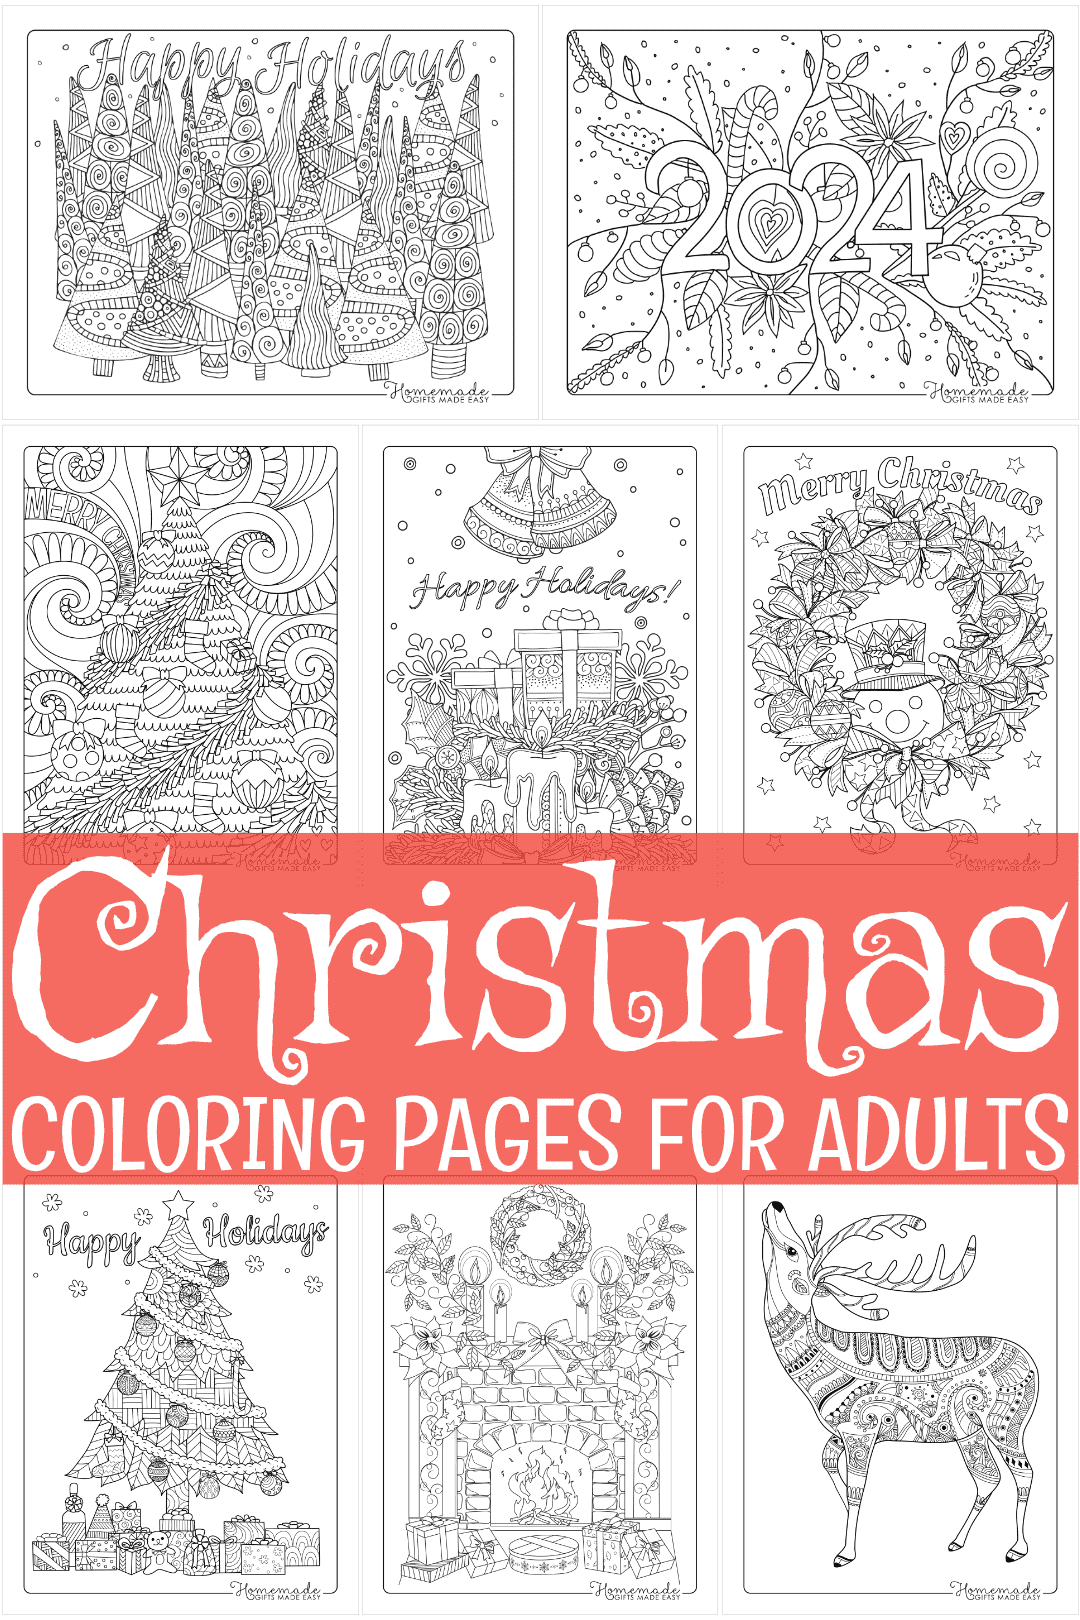 free printable christmas coloring pages for adults - 40+ designs